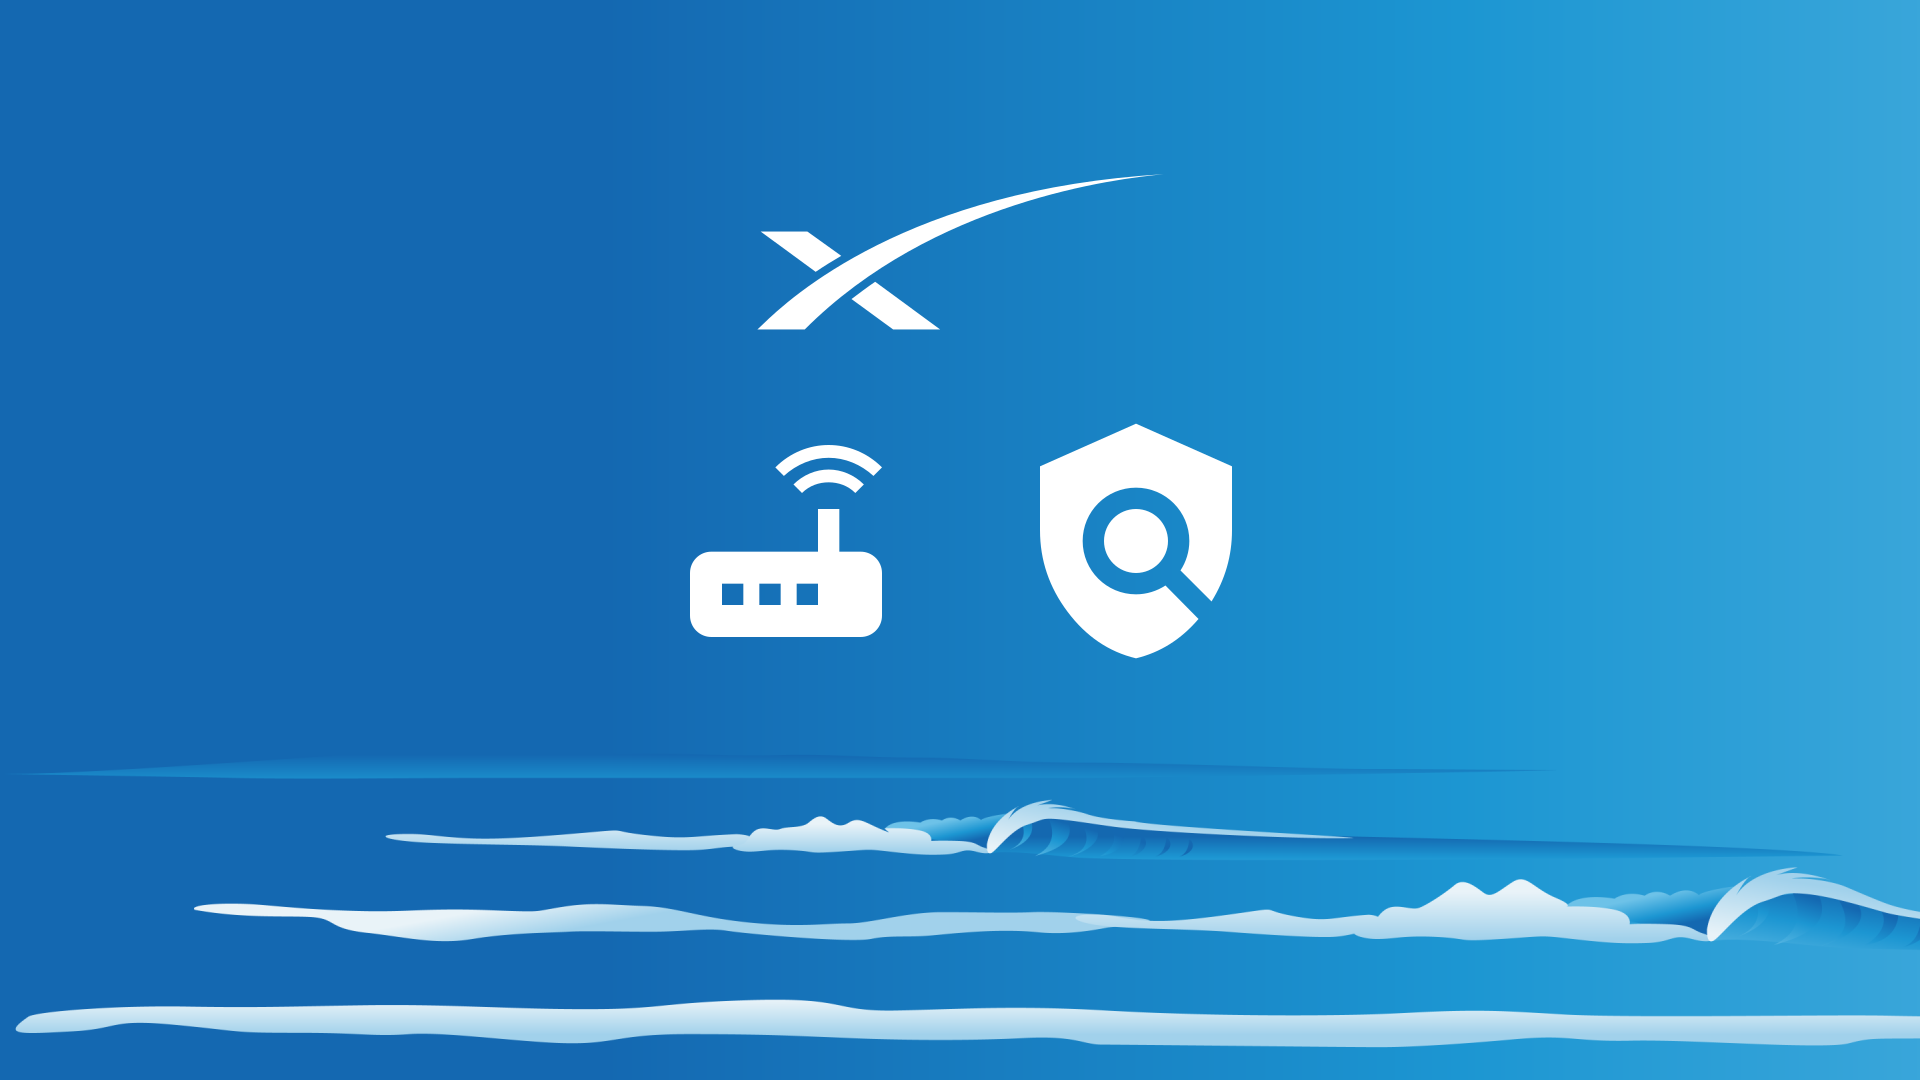 Sea background with macOS Finder icon